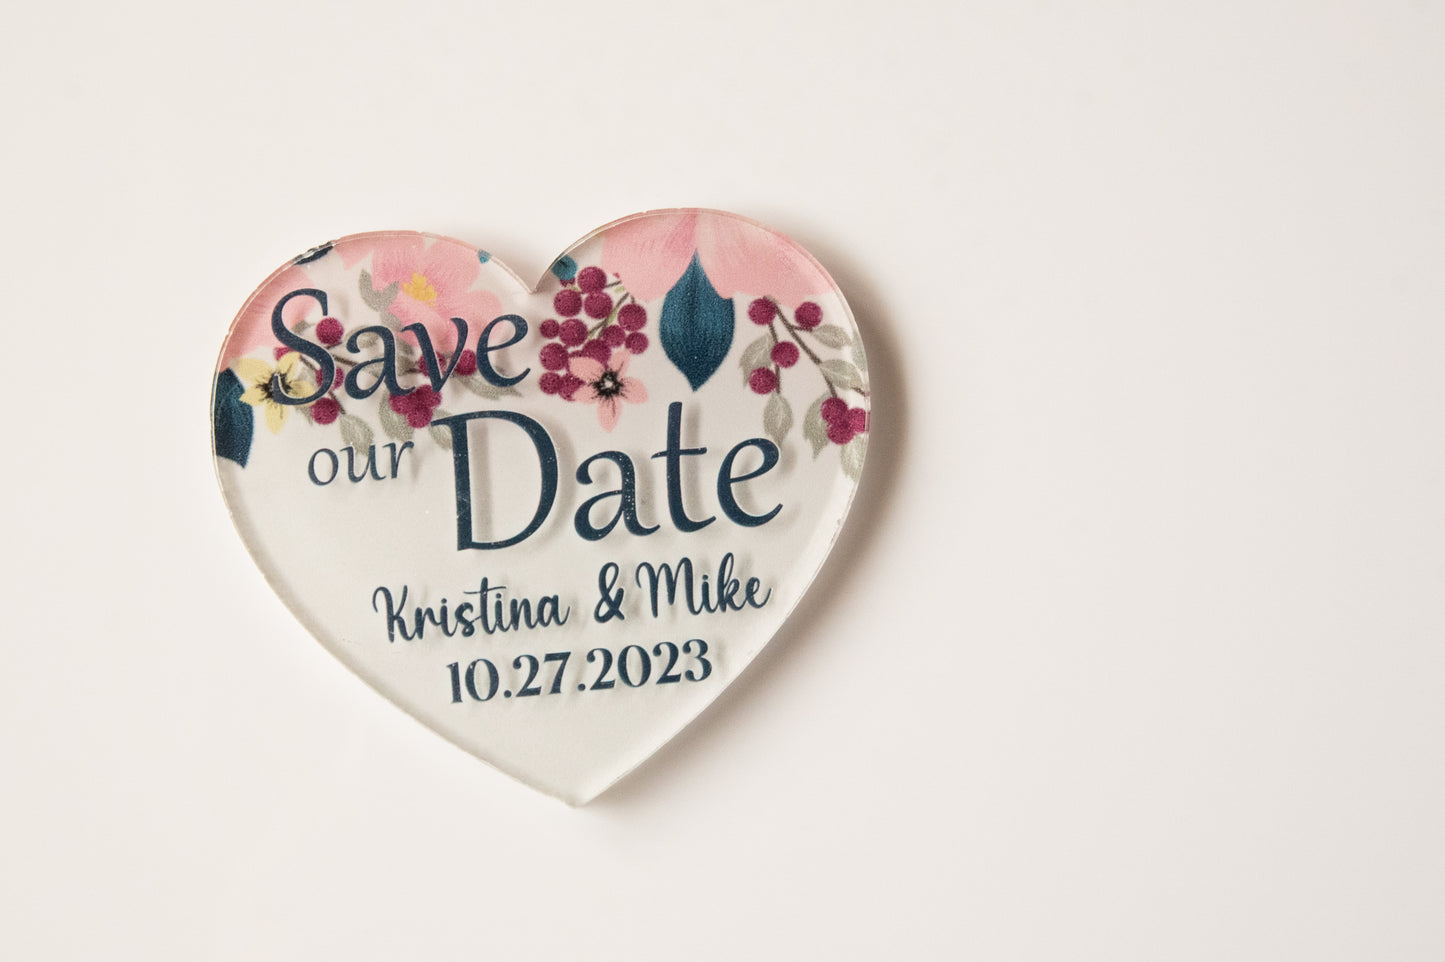 Personalized Heart-Shaped Acrylic Save the Date Magnets - Add a Unique Touch to Your Wedding